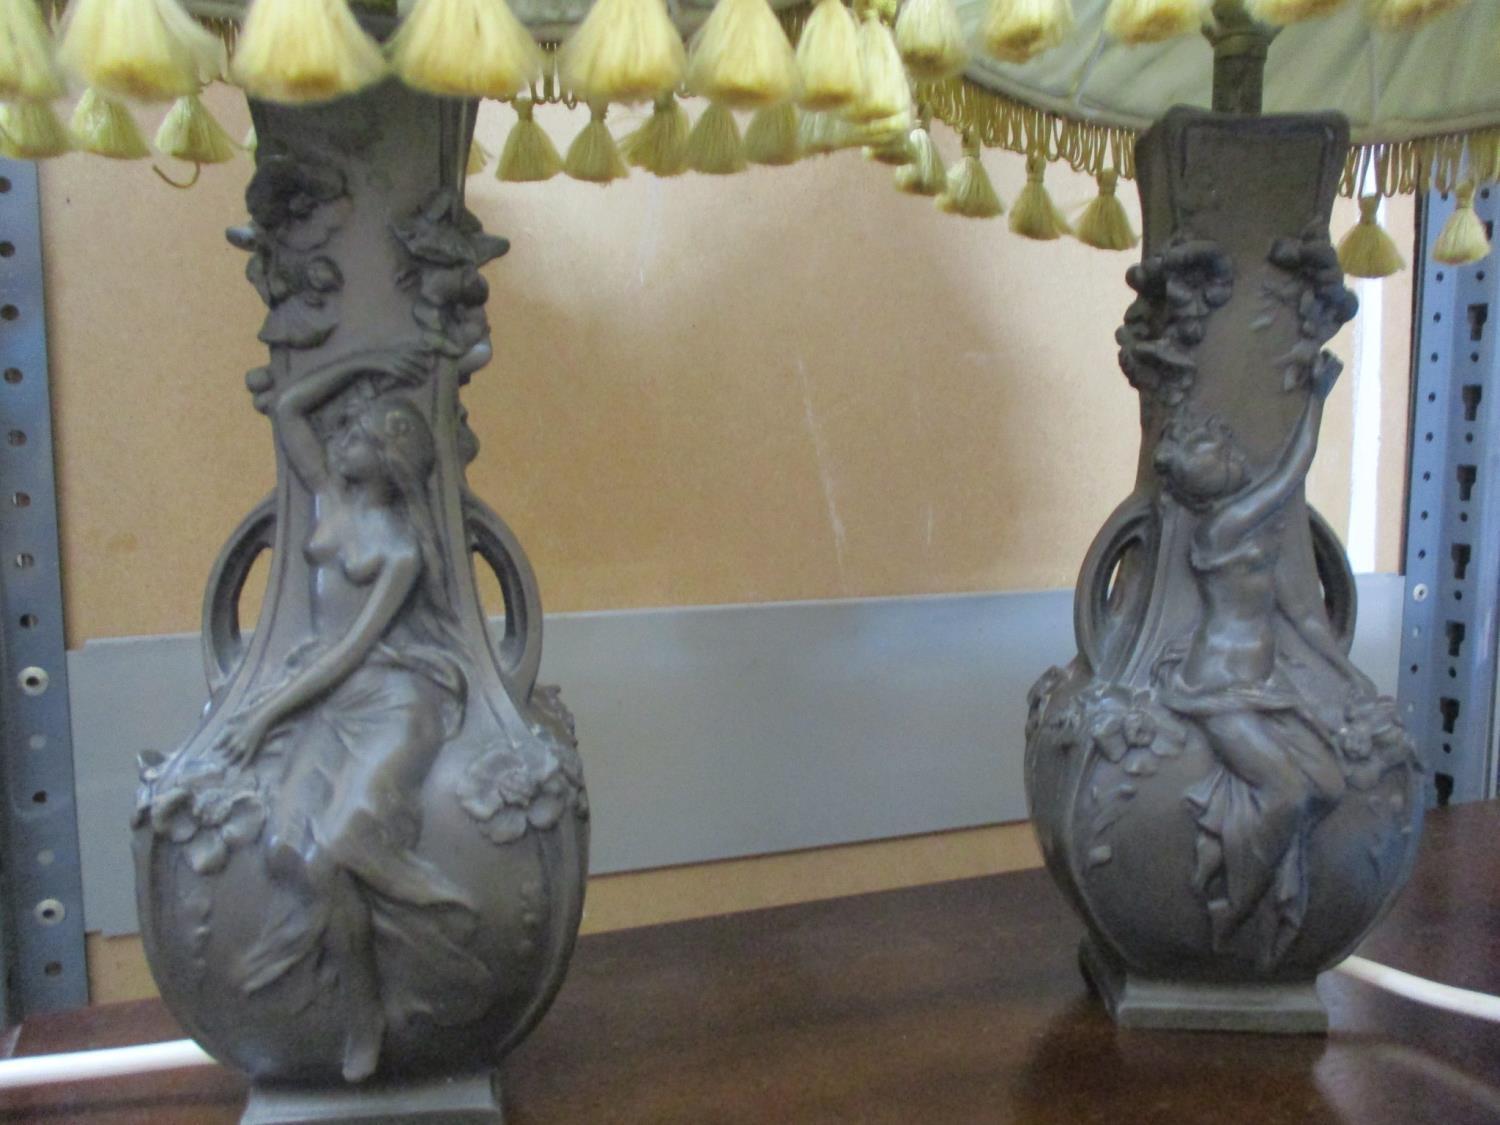 A pair of resin table lamps in the style of Art Nouveau twin handled pewter vases, (lamp shades A/